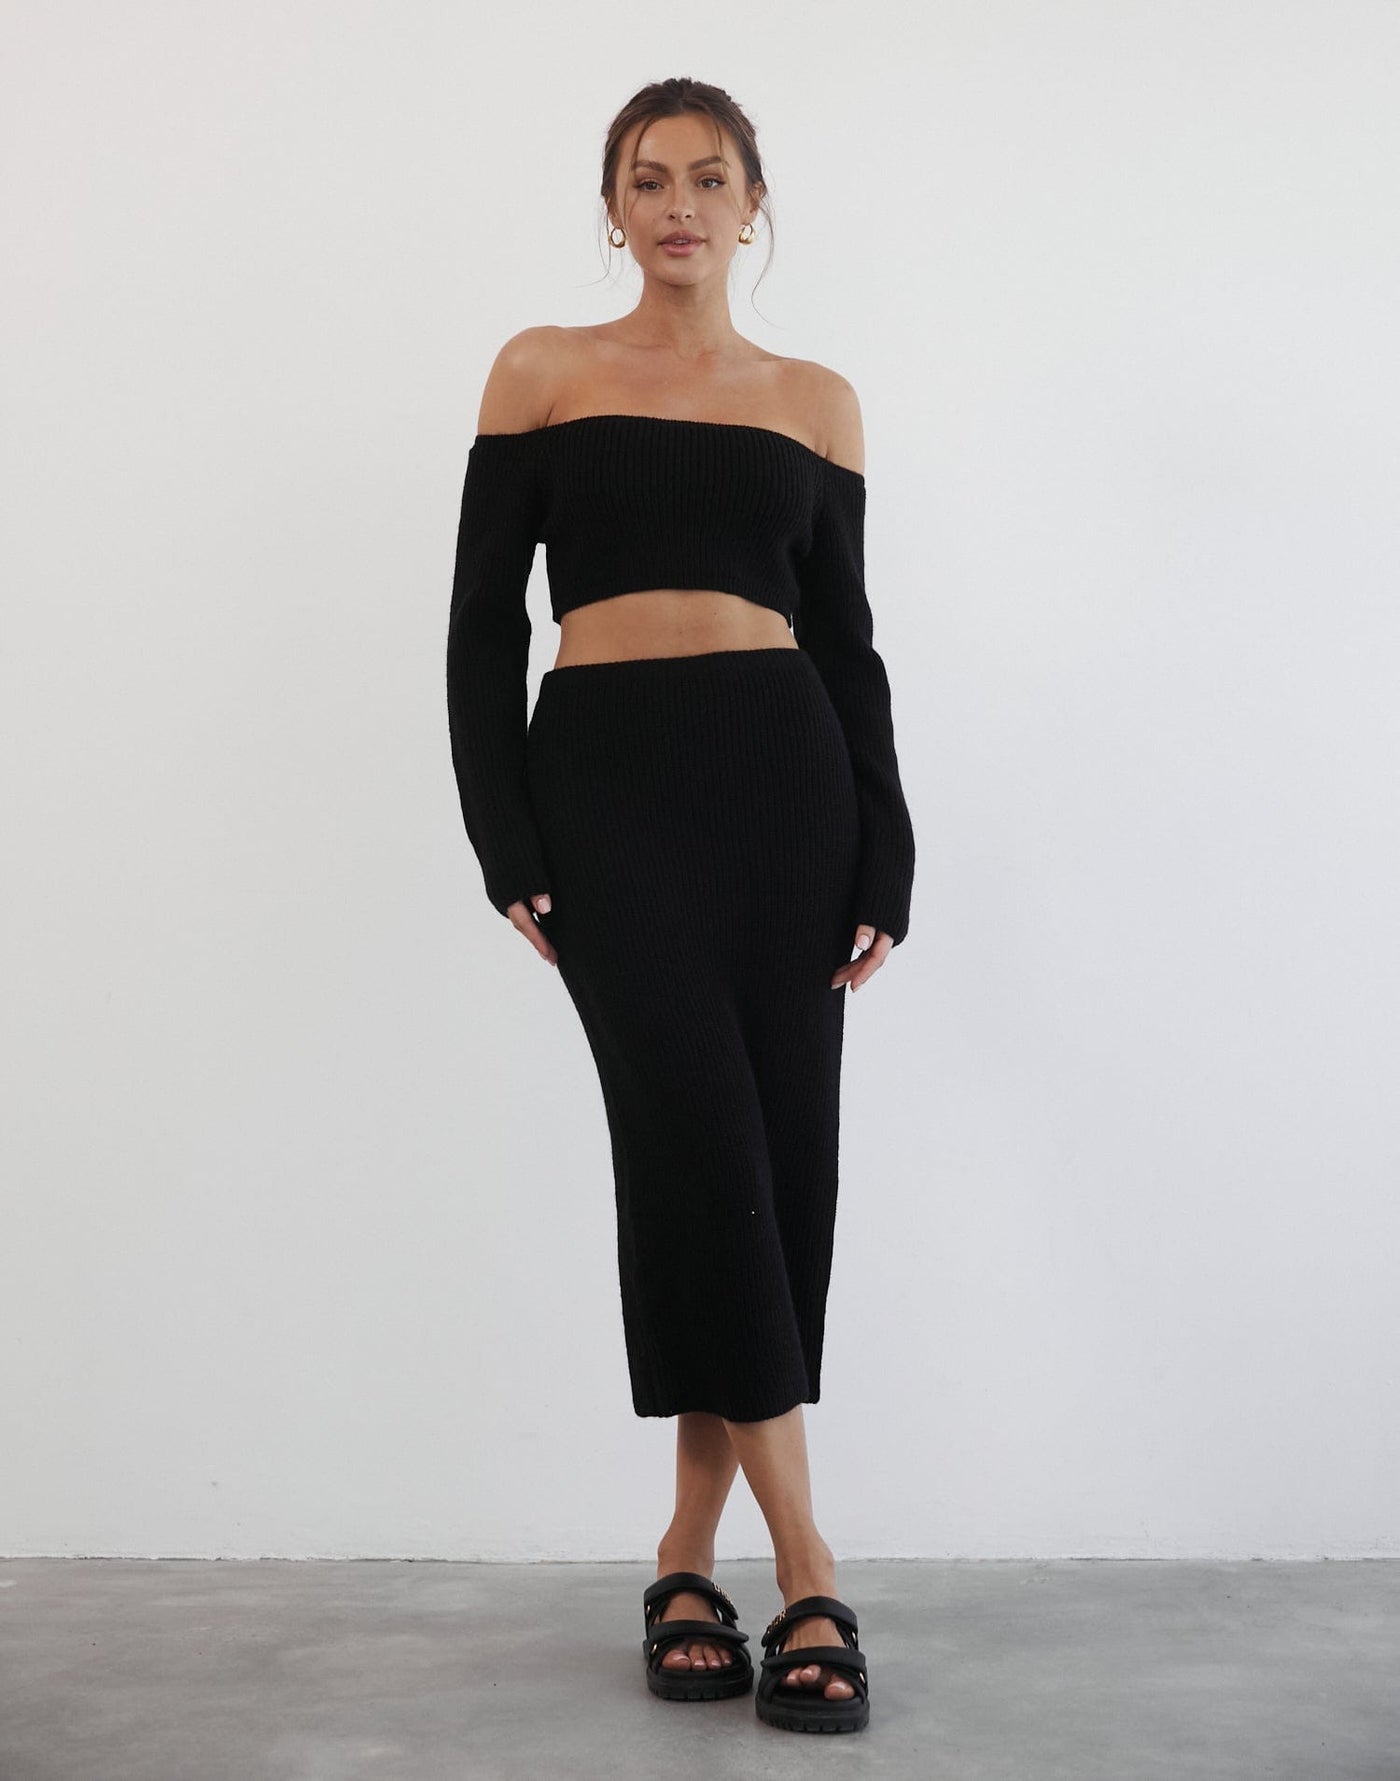 Sharna Maxi Skirt (Black) - Knit Maxi Skirt - Women's Outfit Sets - Charcoal Clothing